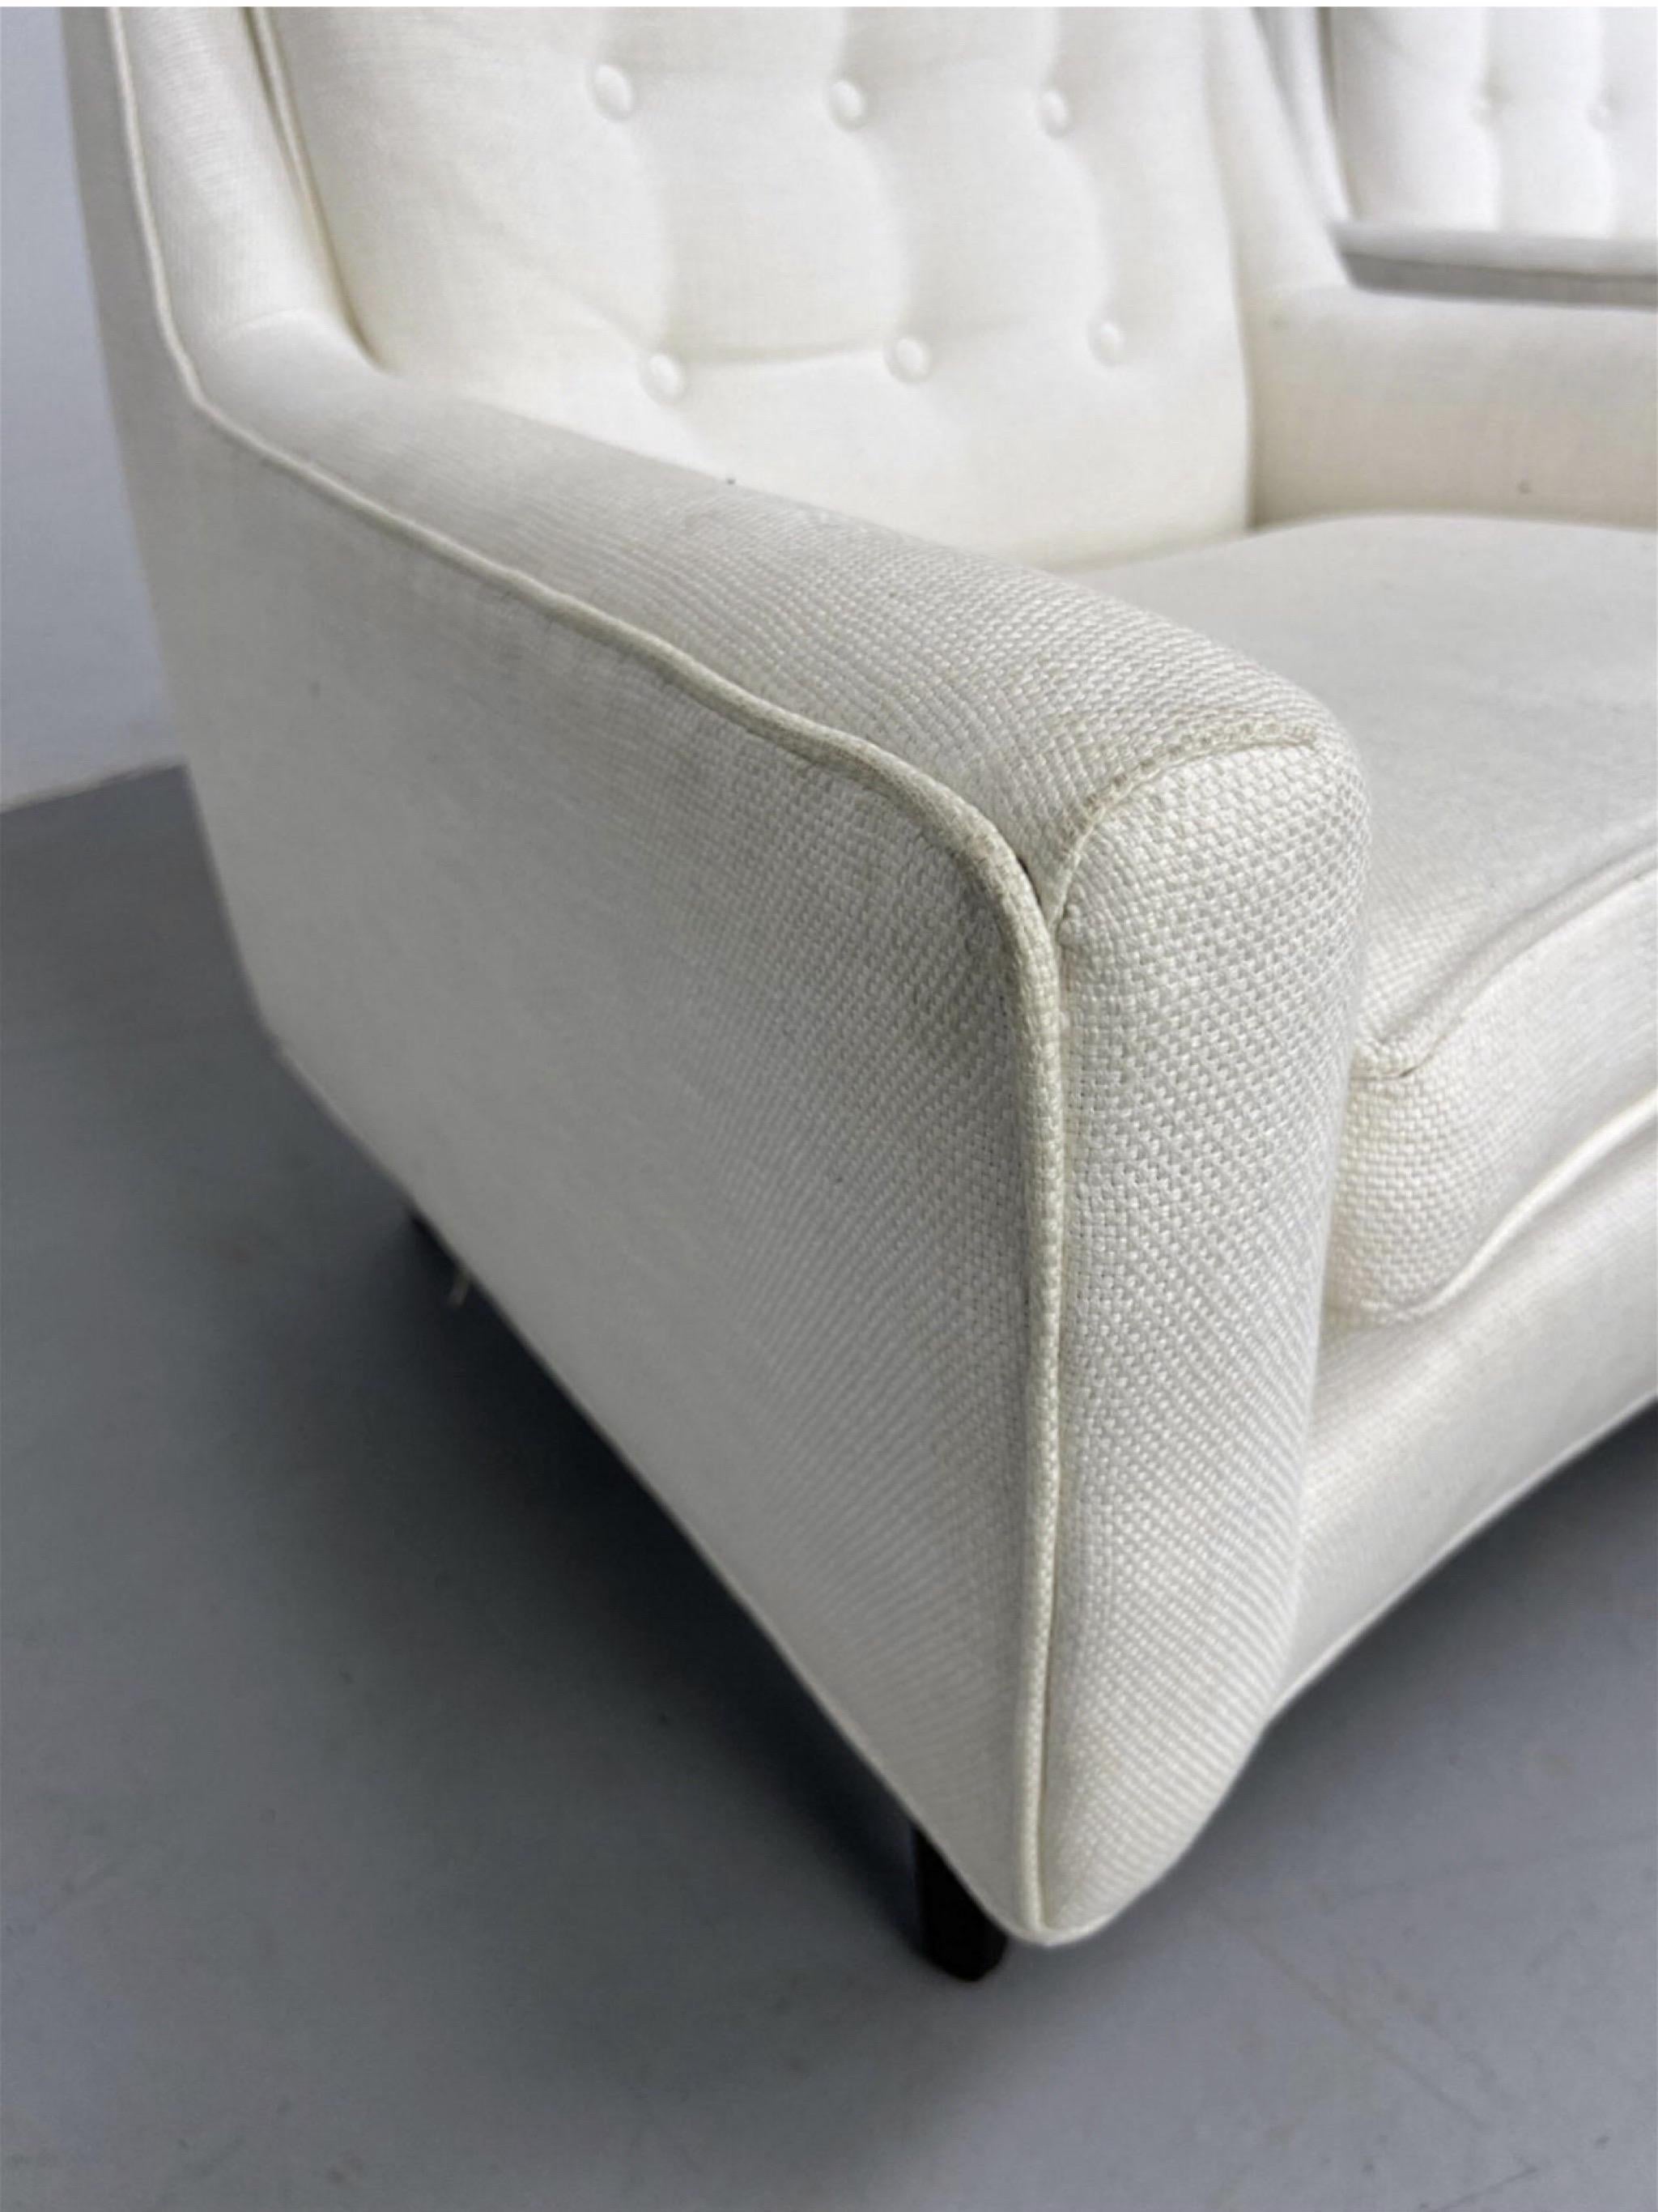 Upholstery Edward Wormley Attributed White Upholstered Lounge Chairs - a Pair